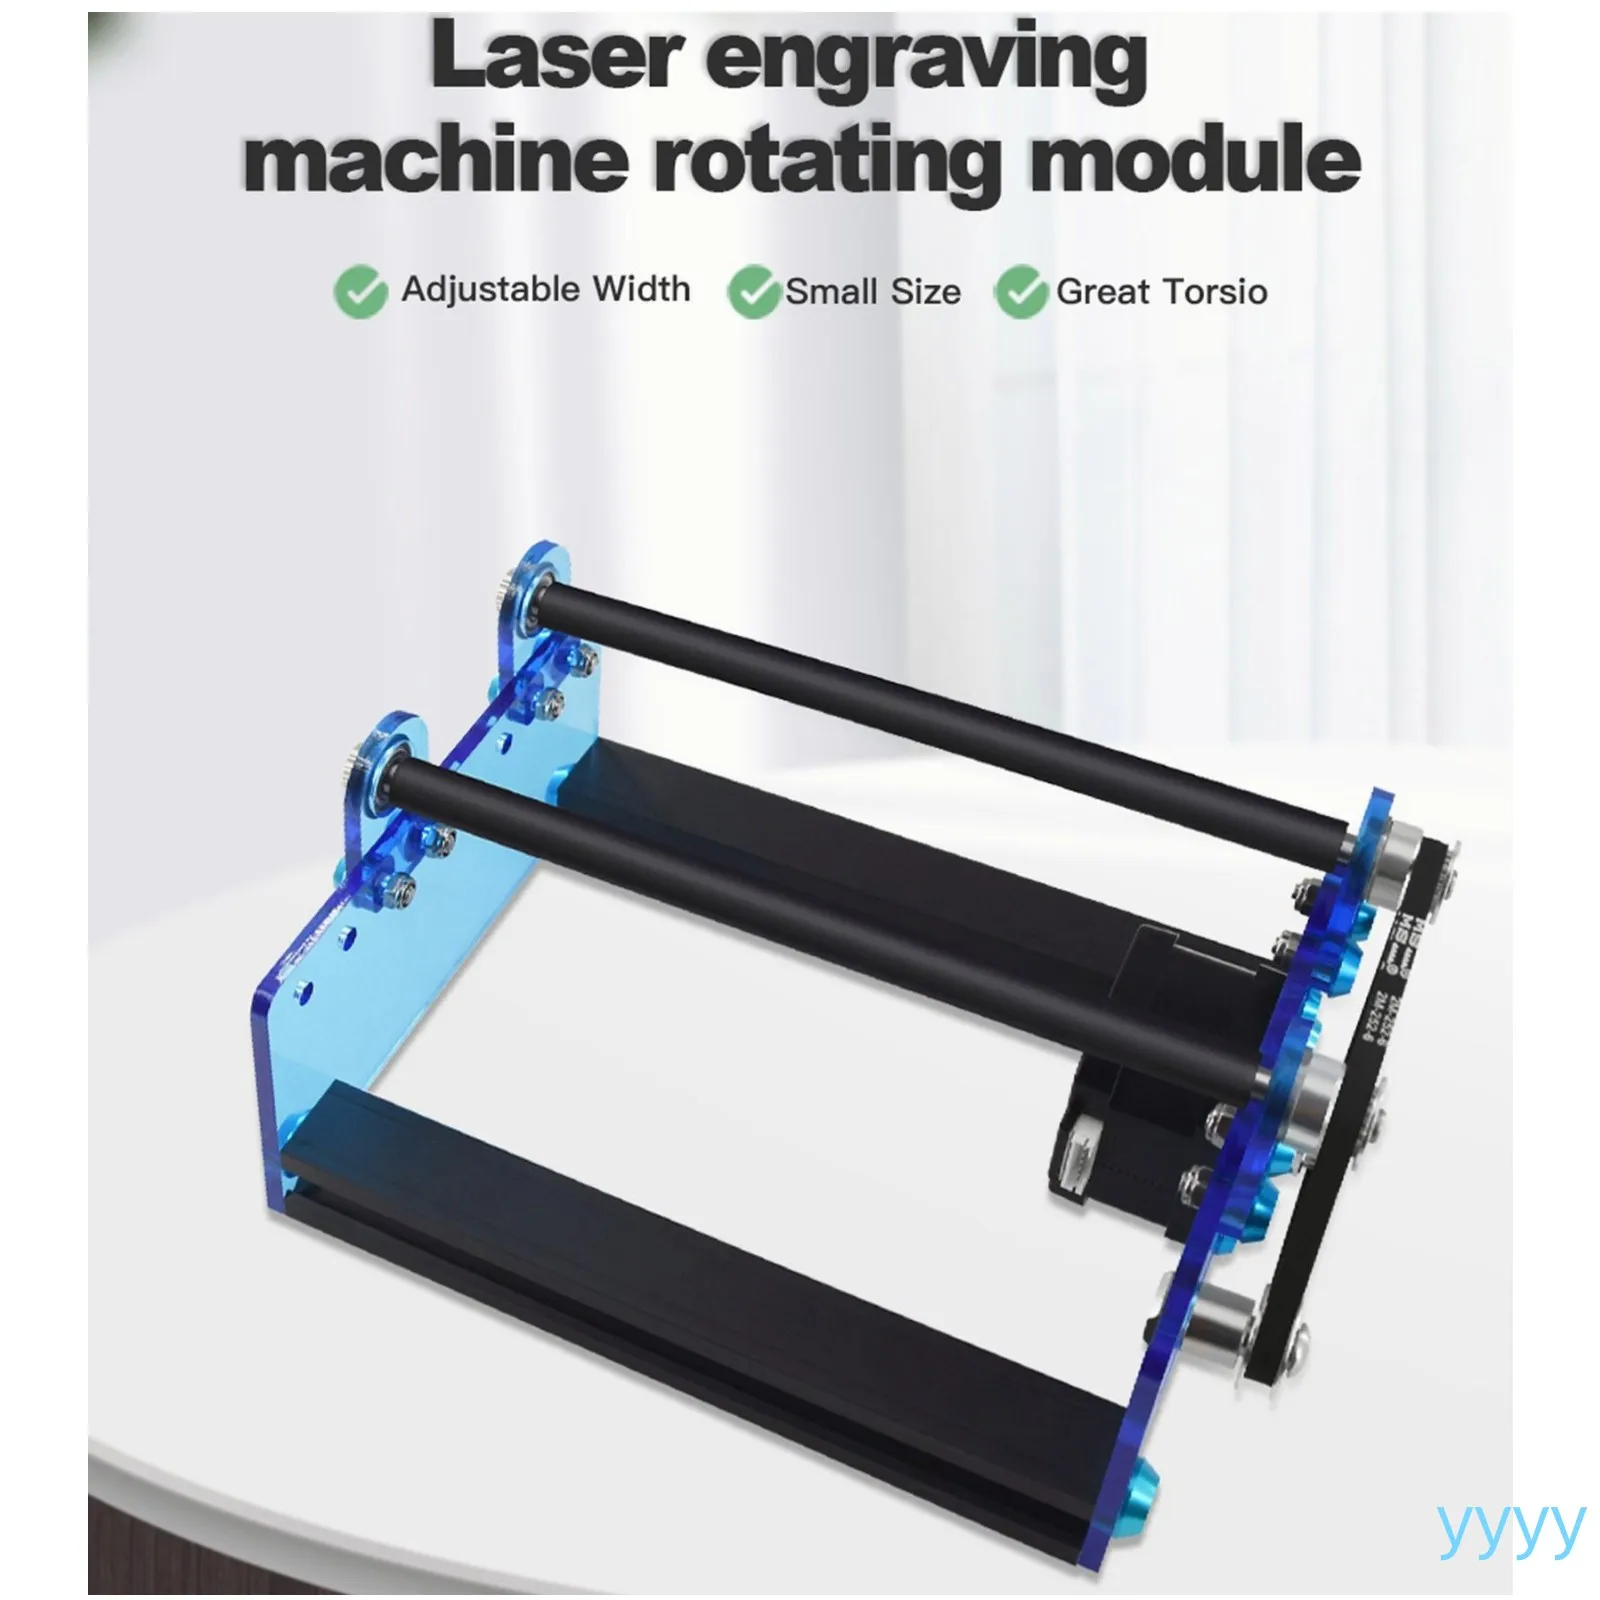 

Twotrees Laser Engraver Y-Axis Rotary Attachment Laser Rotary Roller Engraving Module Engraving Cylindrical Objects